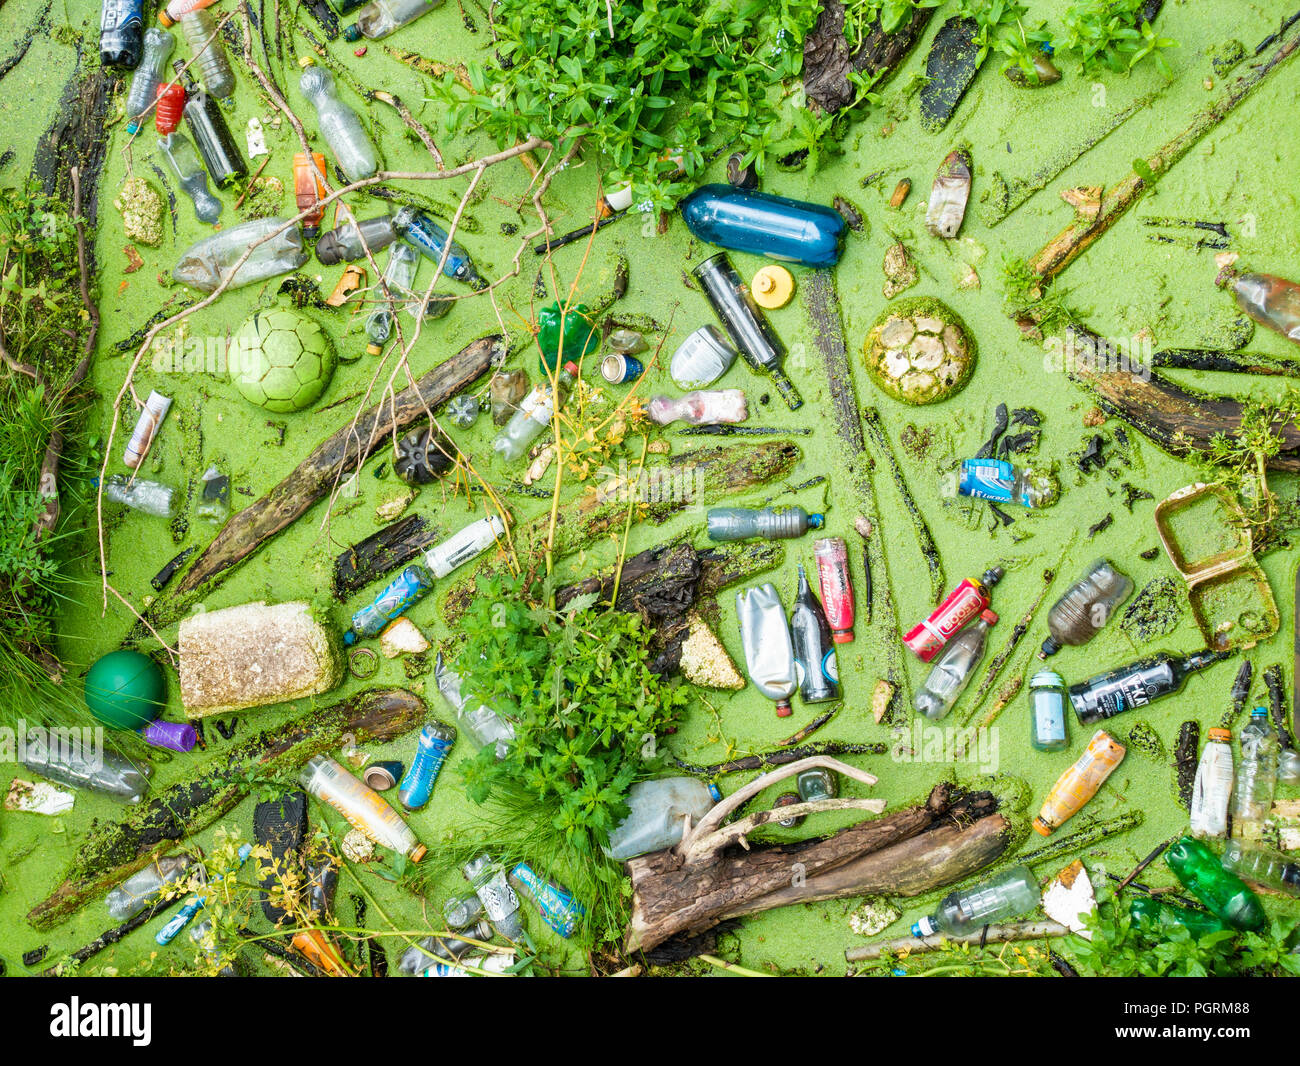 Plastic bottles and rubbish in UK river Stock Photo